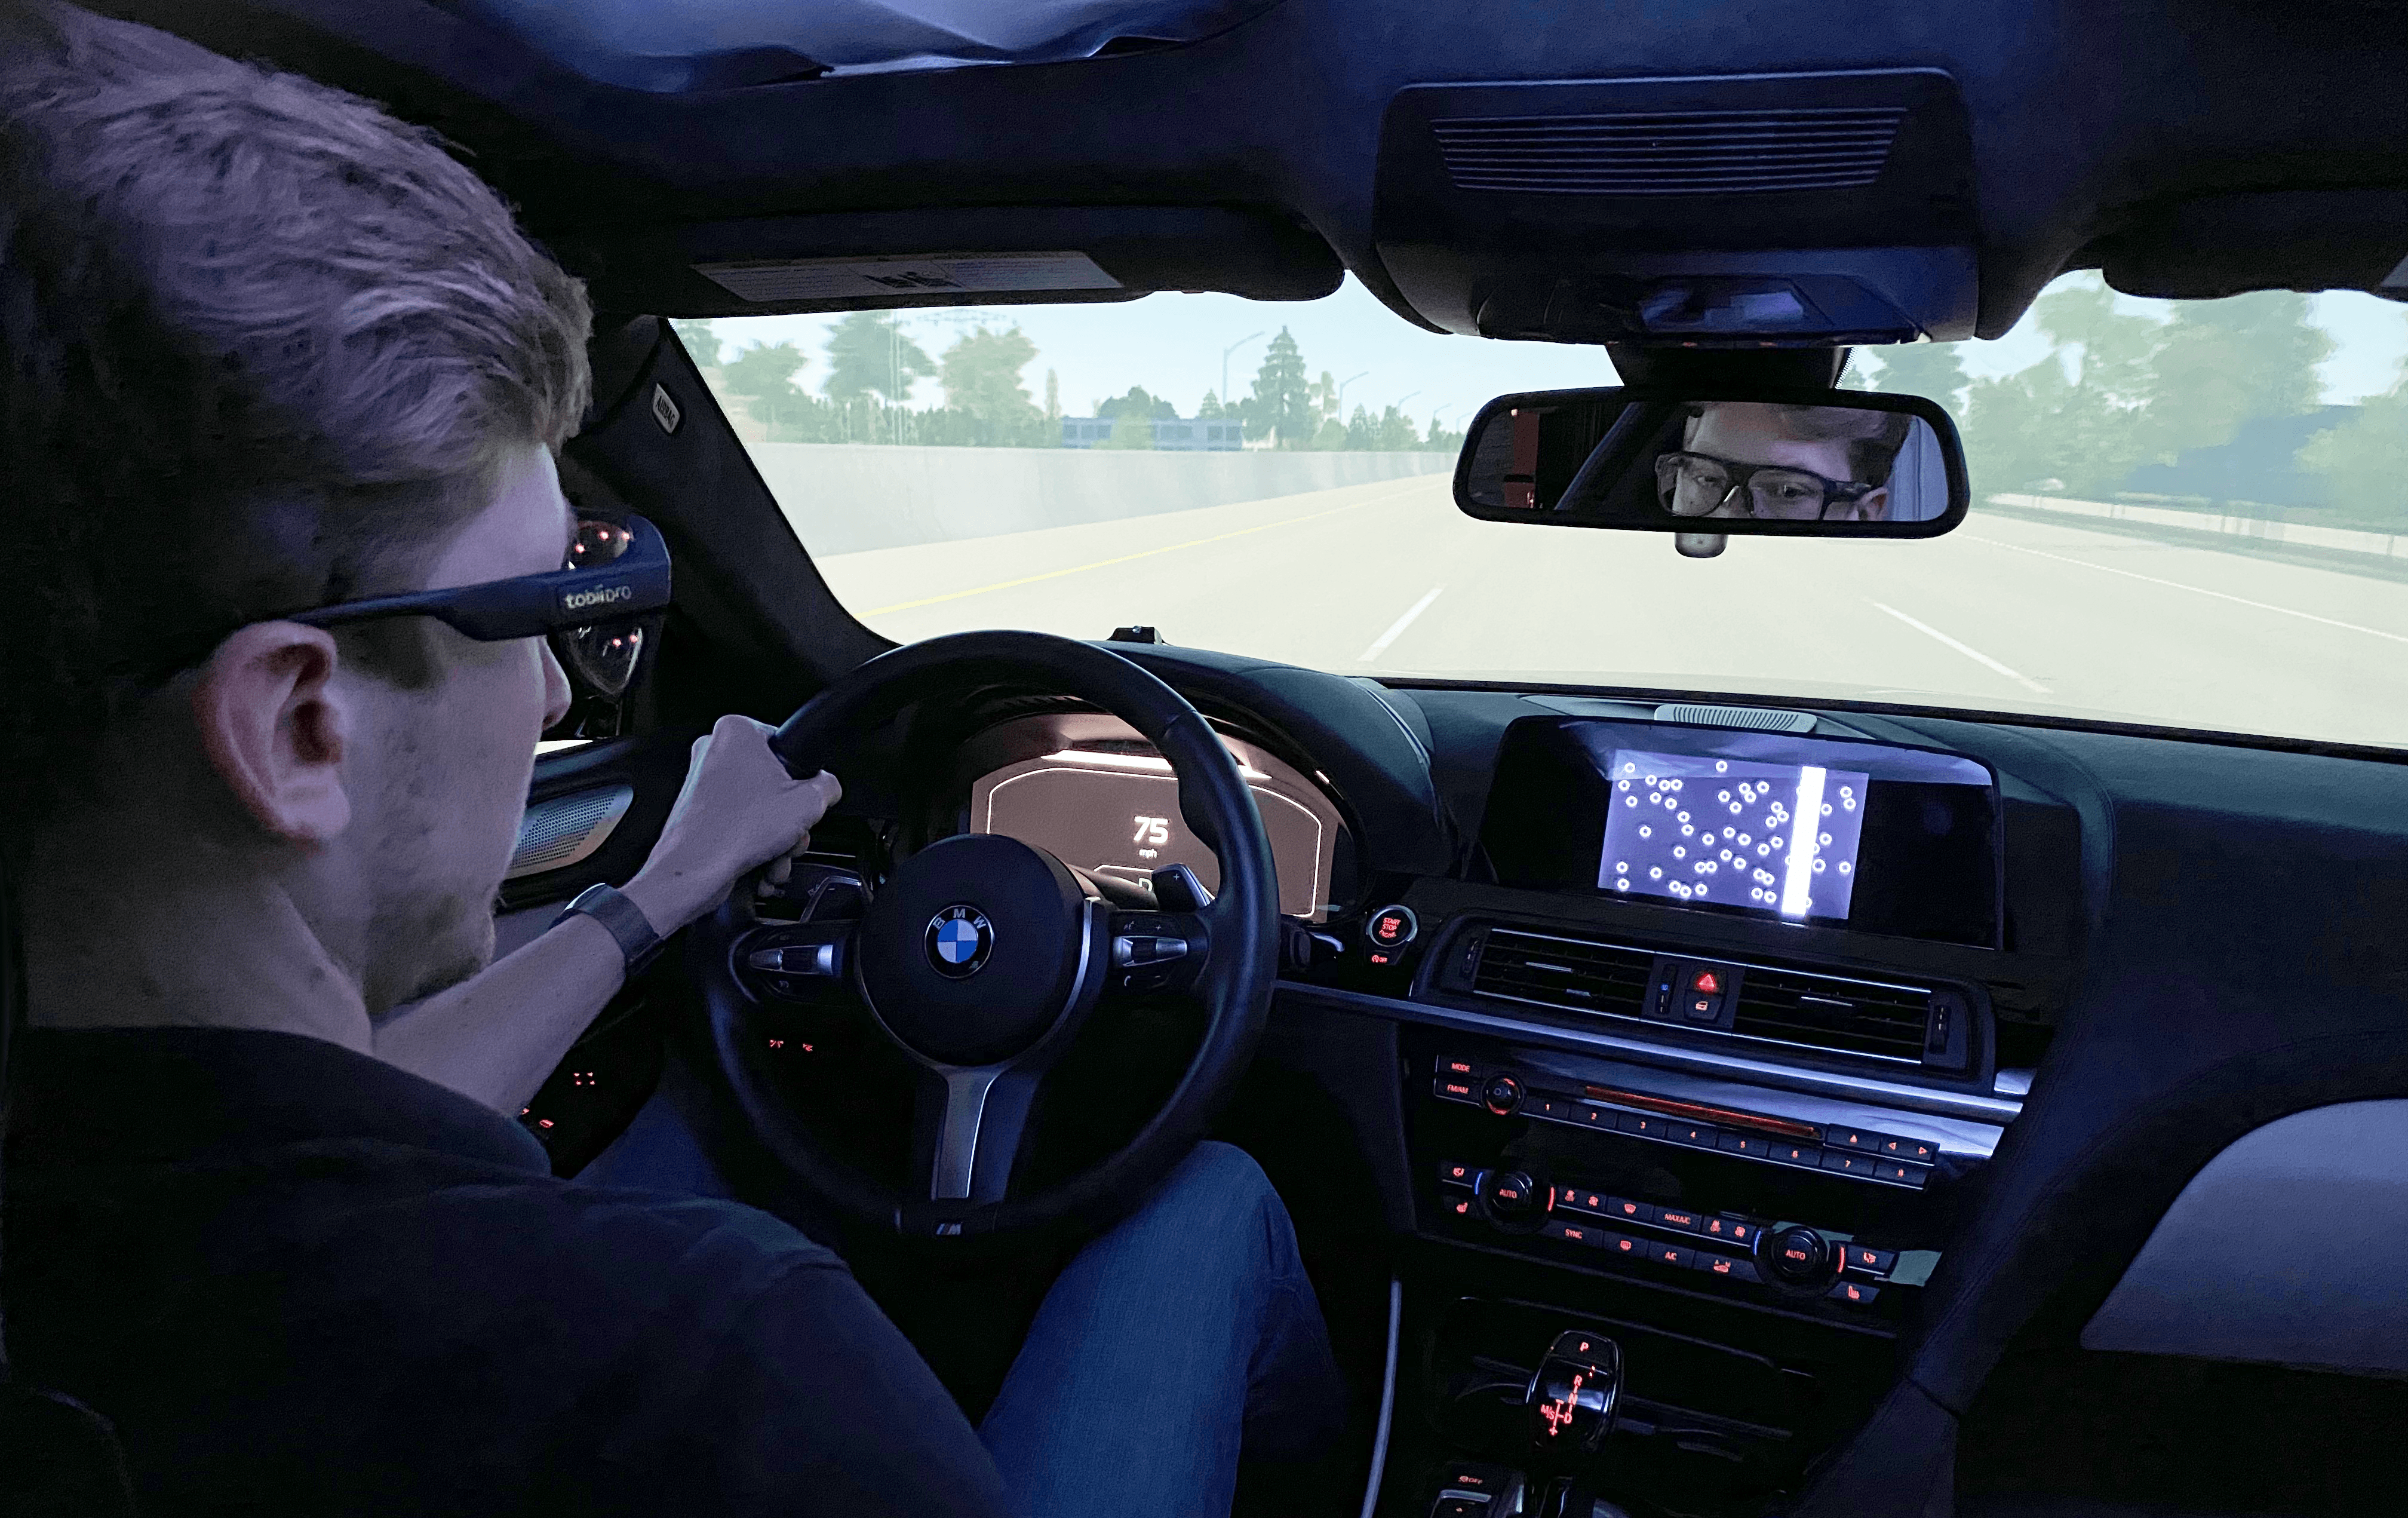 Using Tobii Pro Glasses 3 wearable eye trackers while driving a car